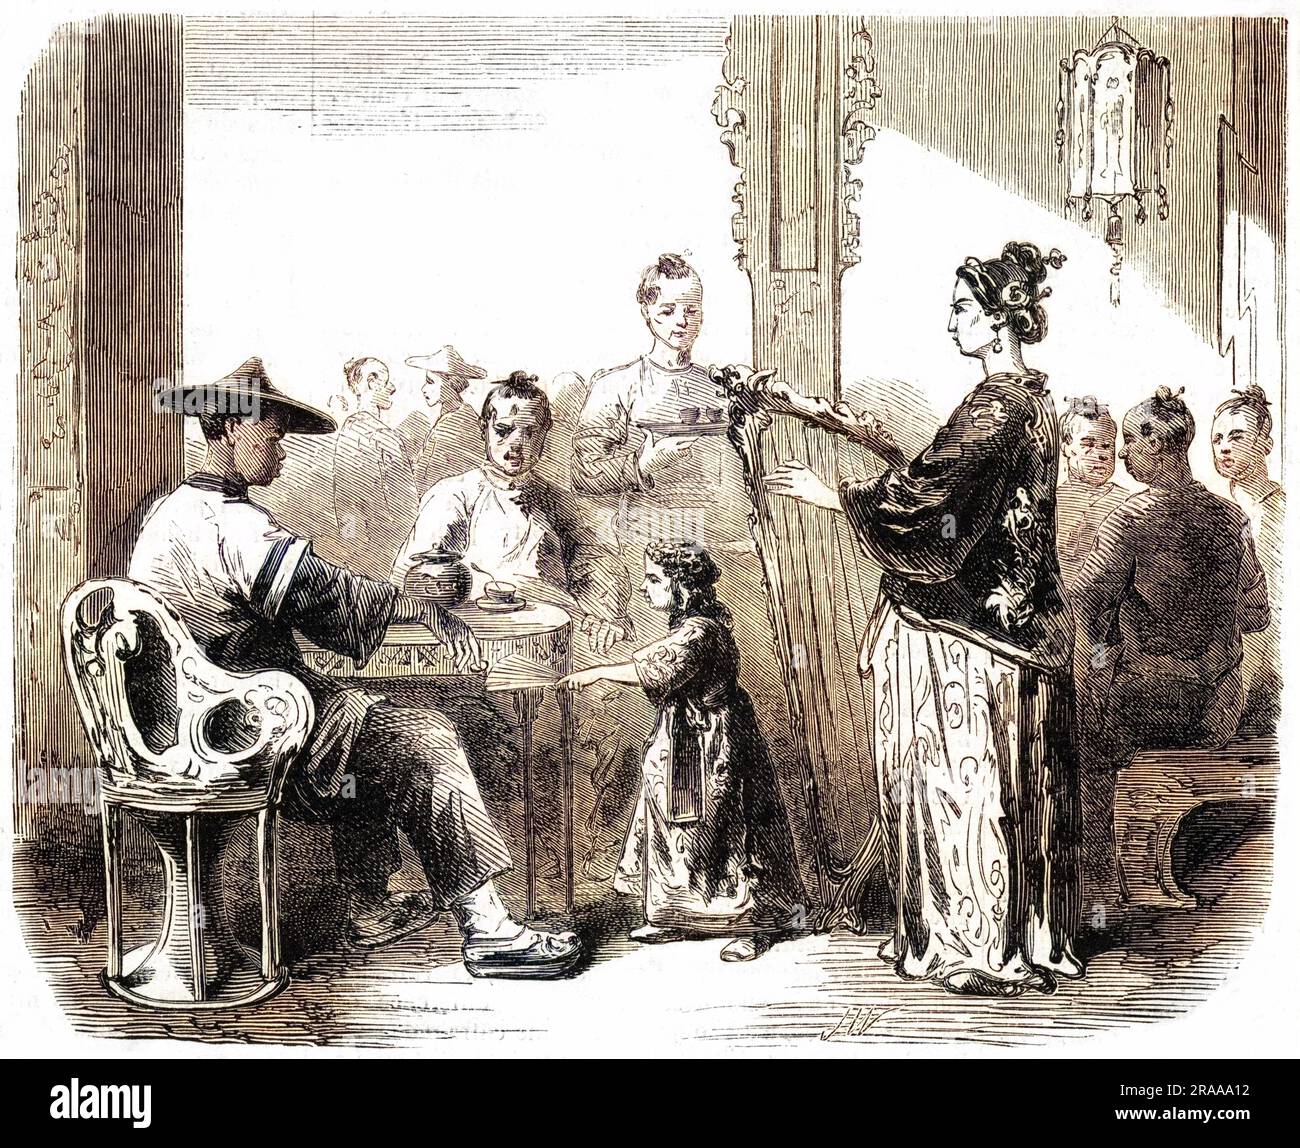 A Chinese musical performance, 1861. A lady plays the harp, whilst a child collects payment on a fan from a seated audience member.     Date: 1861 Stock Photo